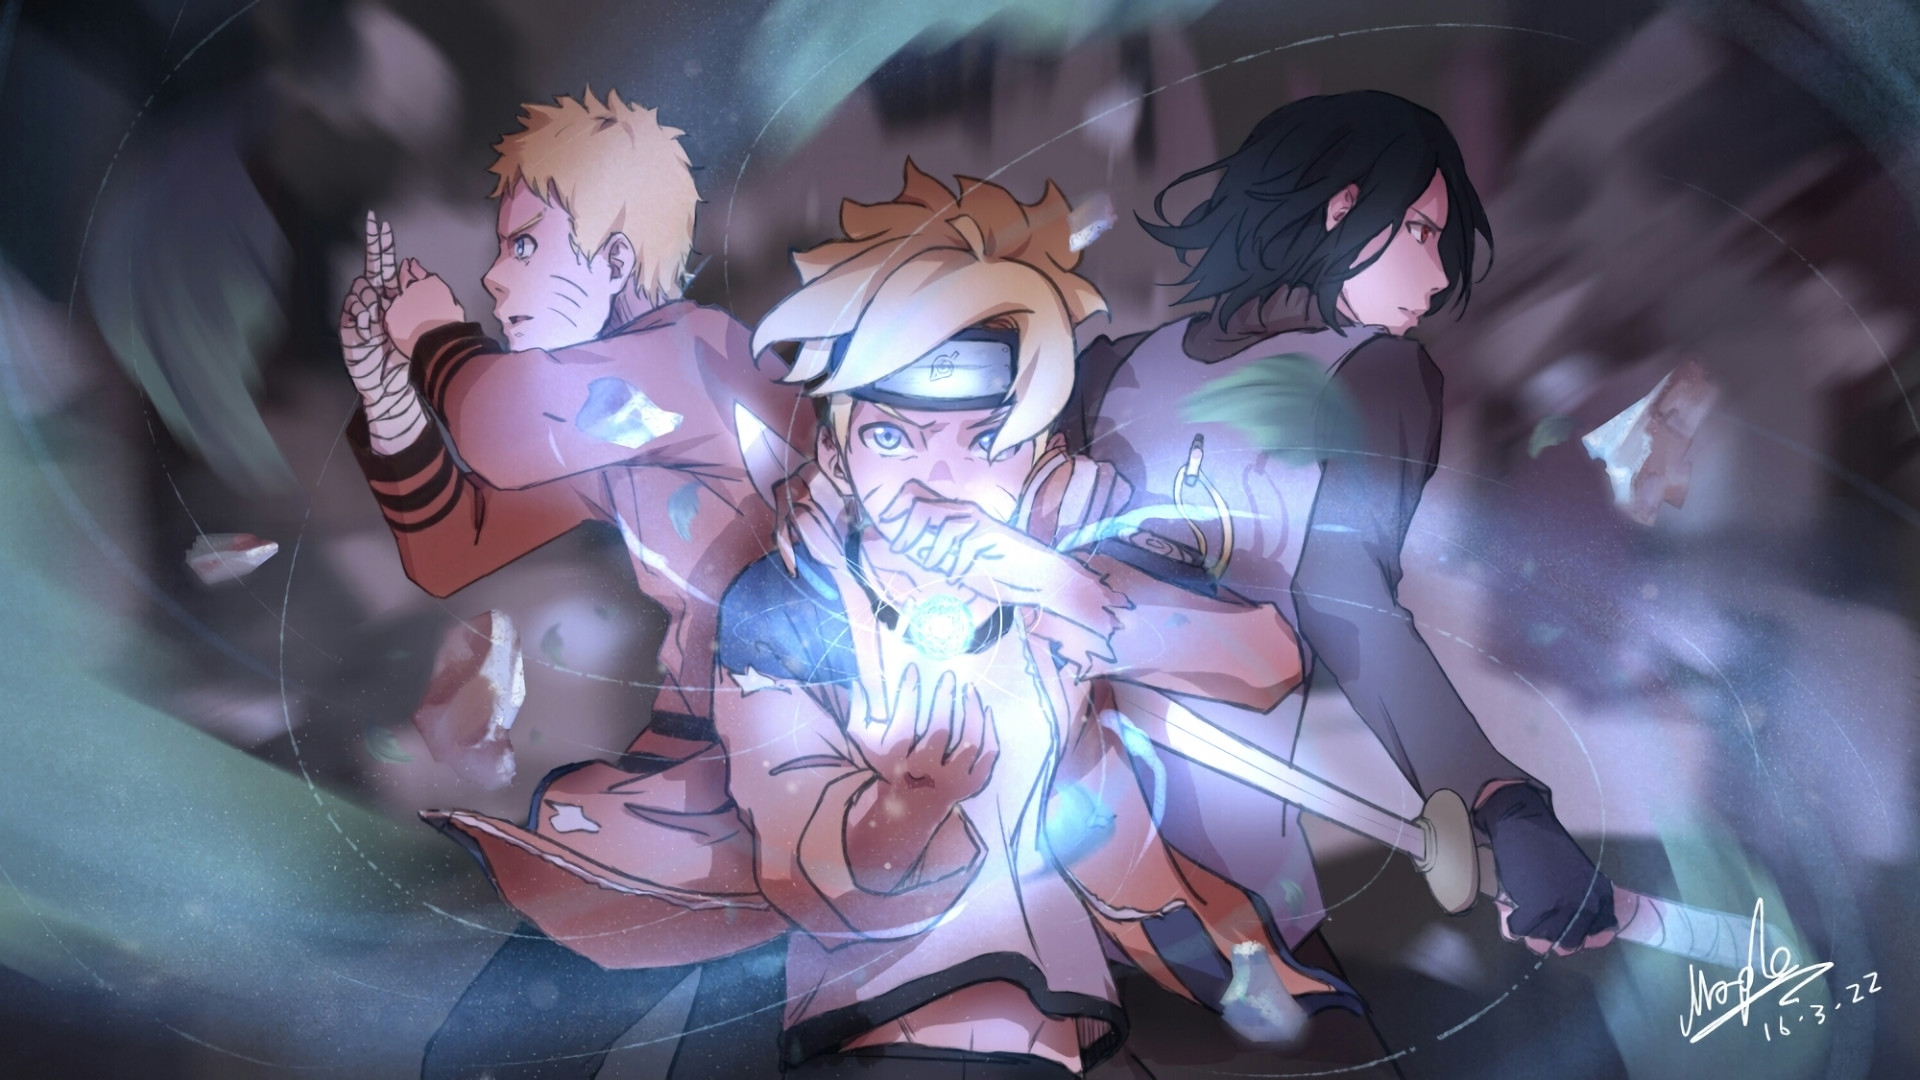 Explore More Wallpapers in the Boruto Subcategory!